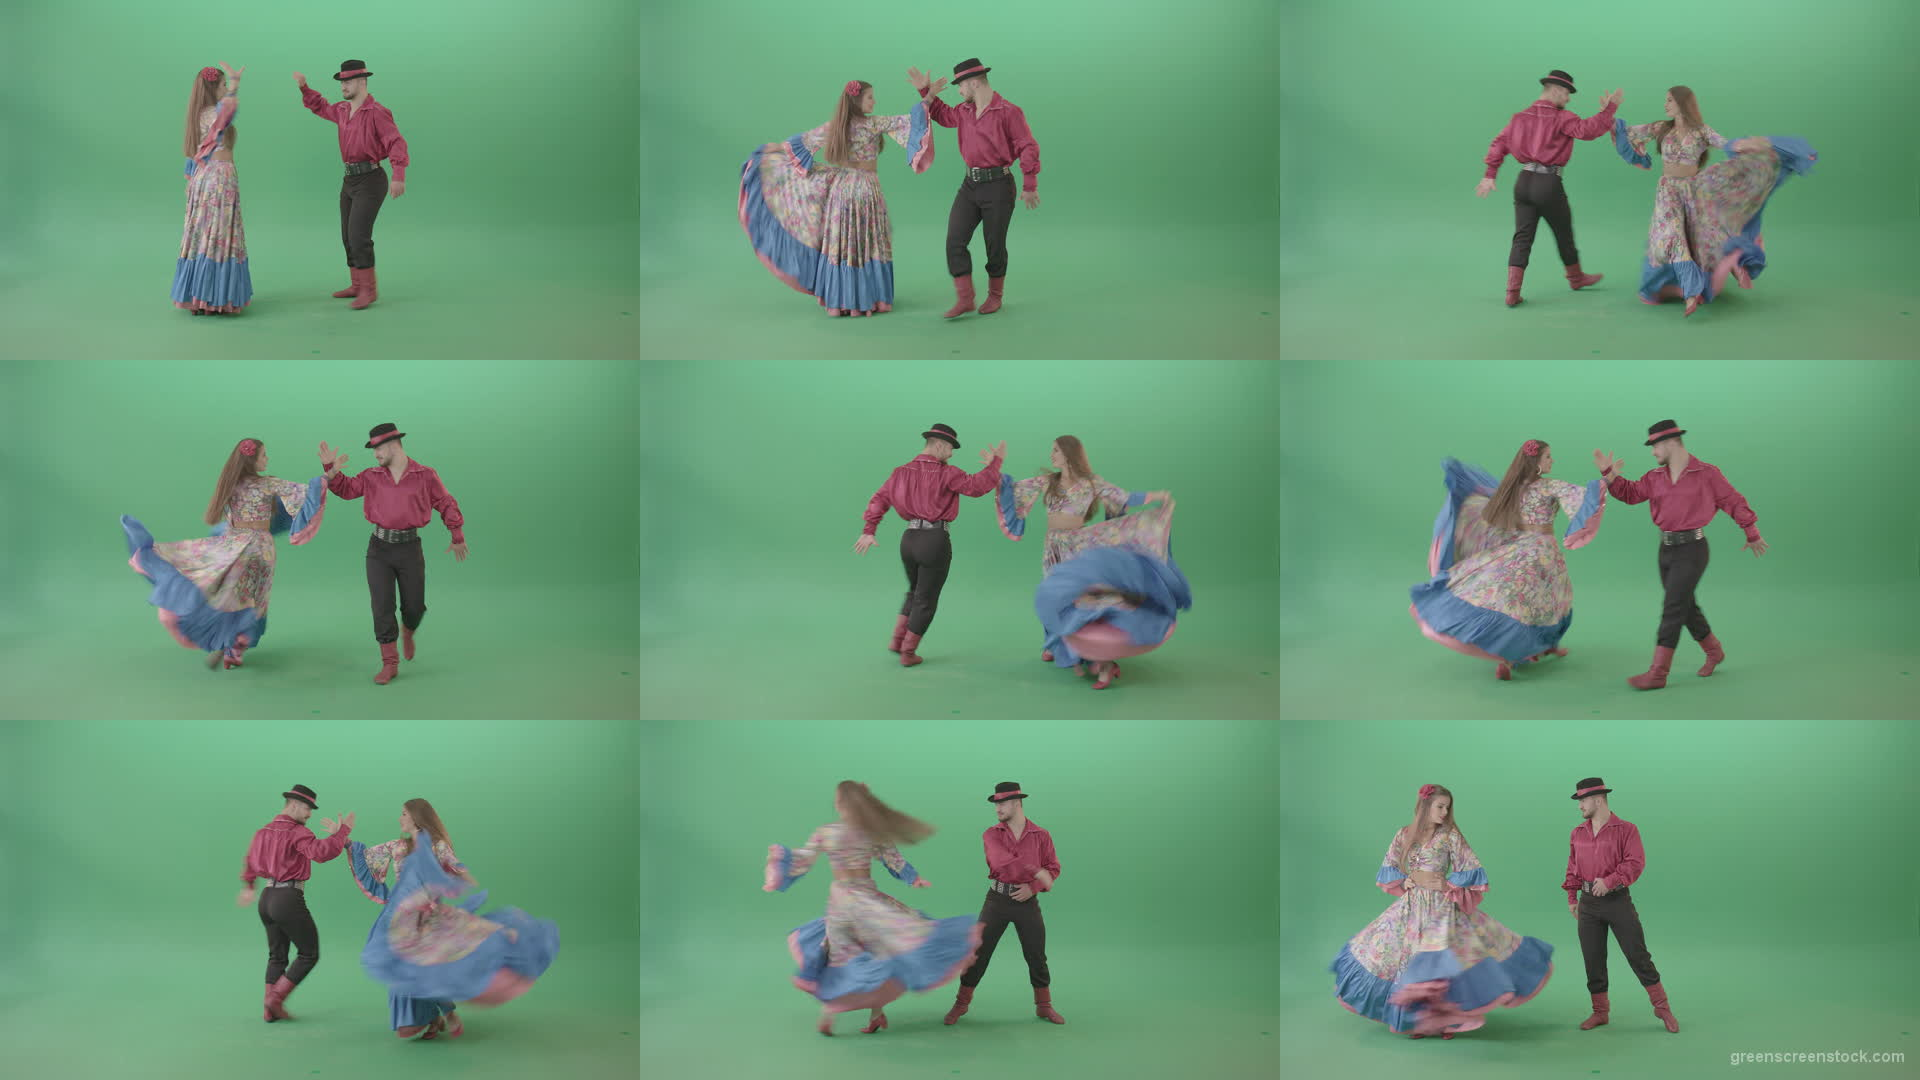 Folk-national-romania-dance-by-gypsy-tzigane-couple-isolated-on-green-screen-4K-video-footage-1920 Green Screen Stock